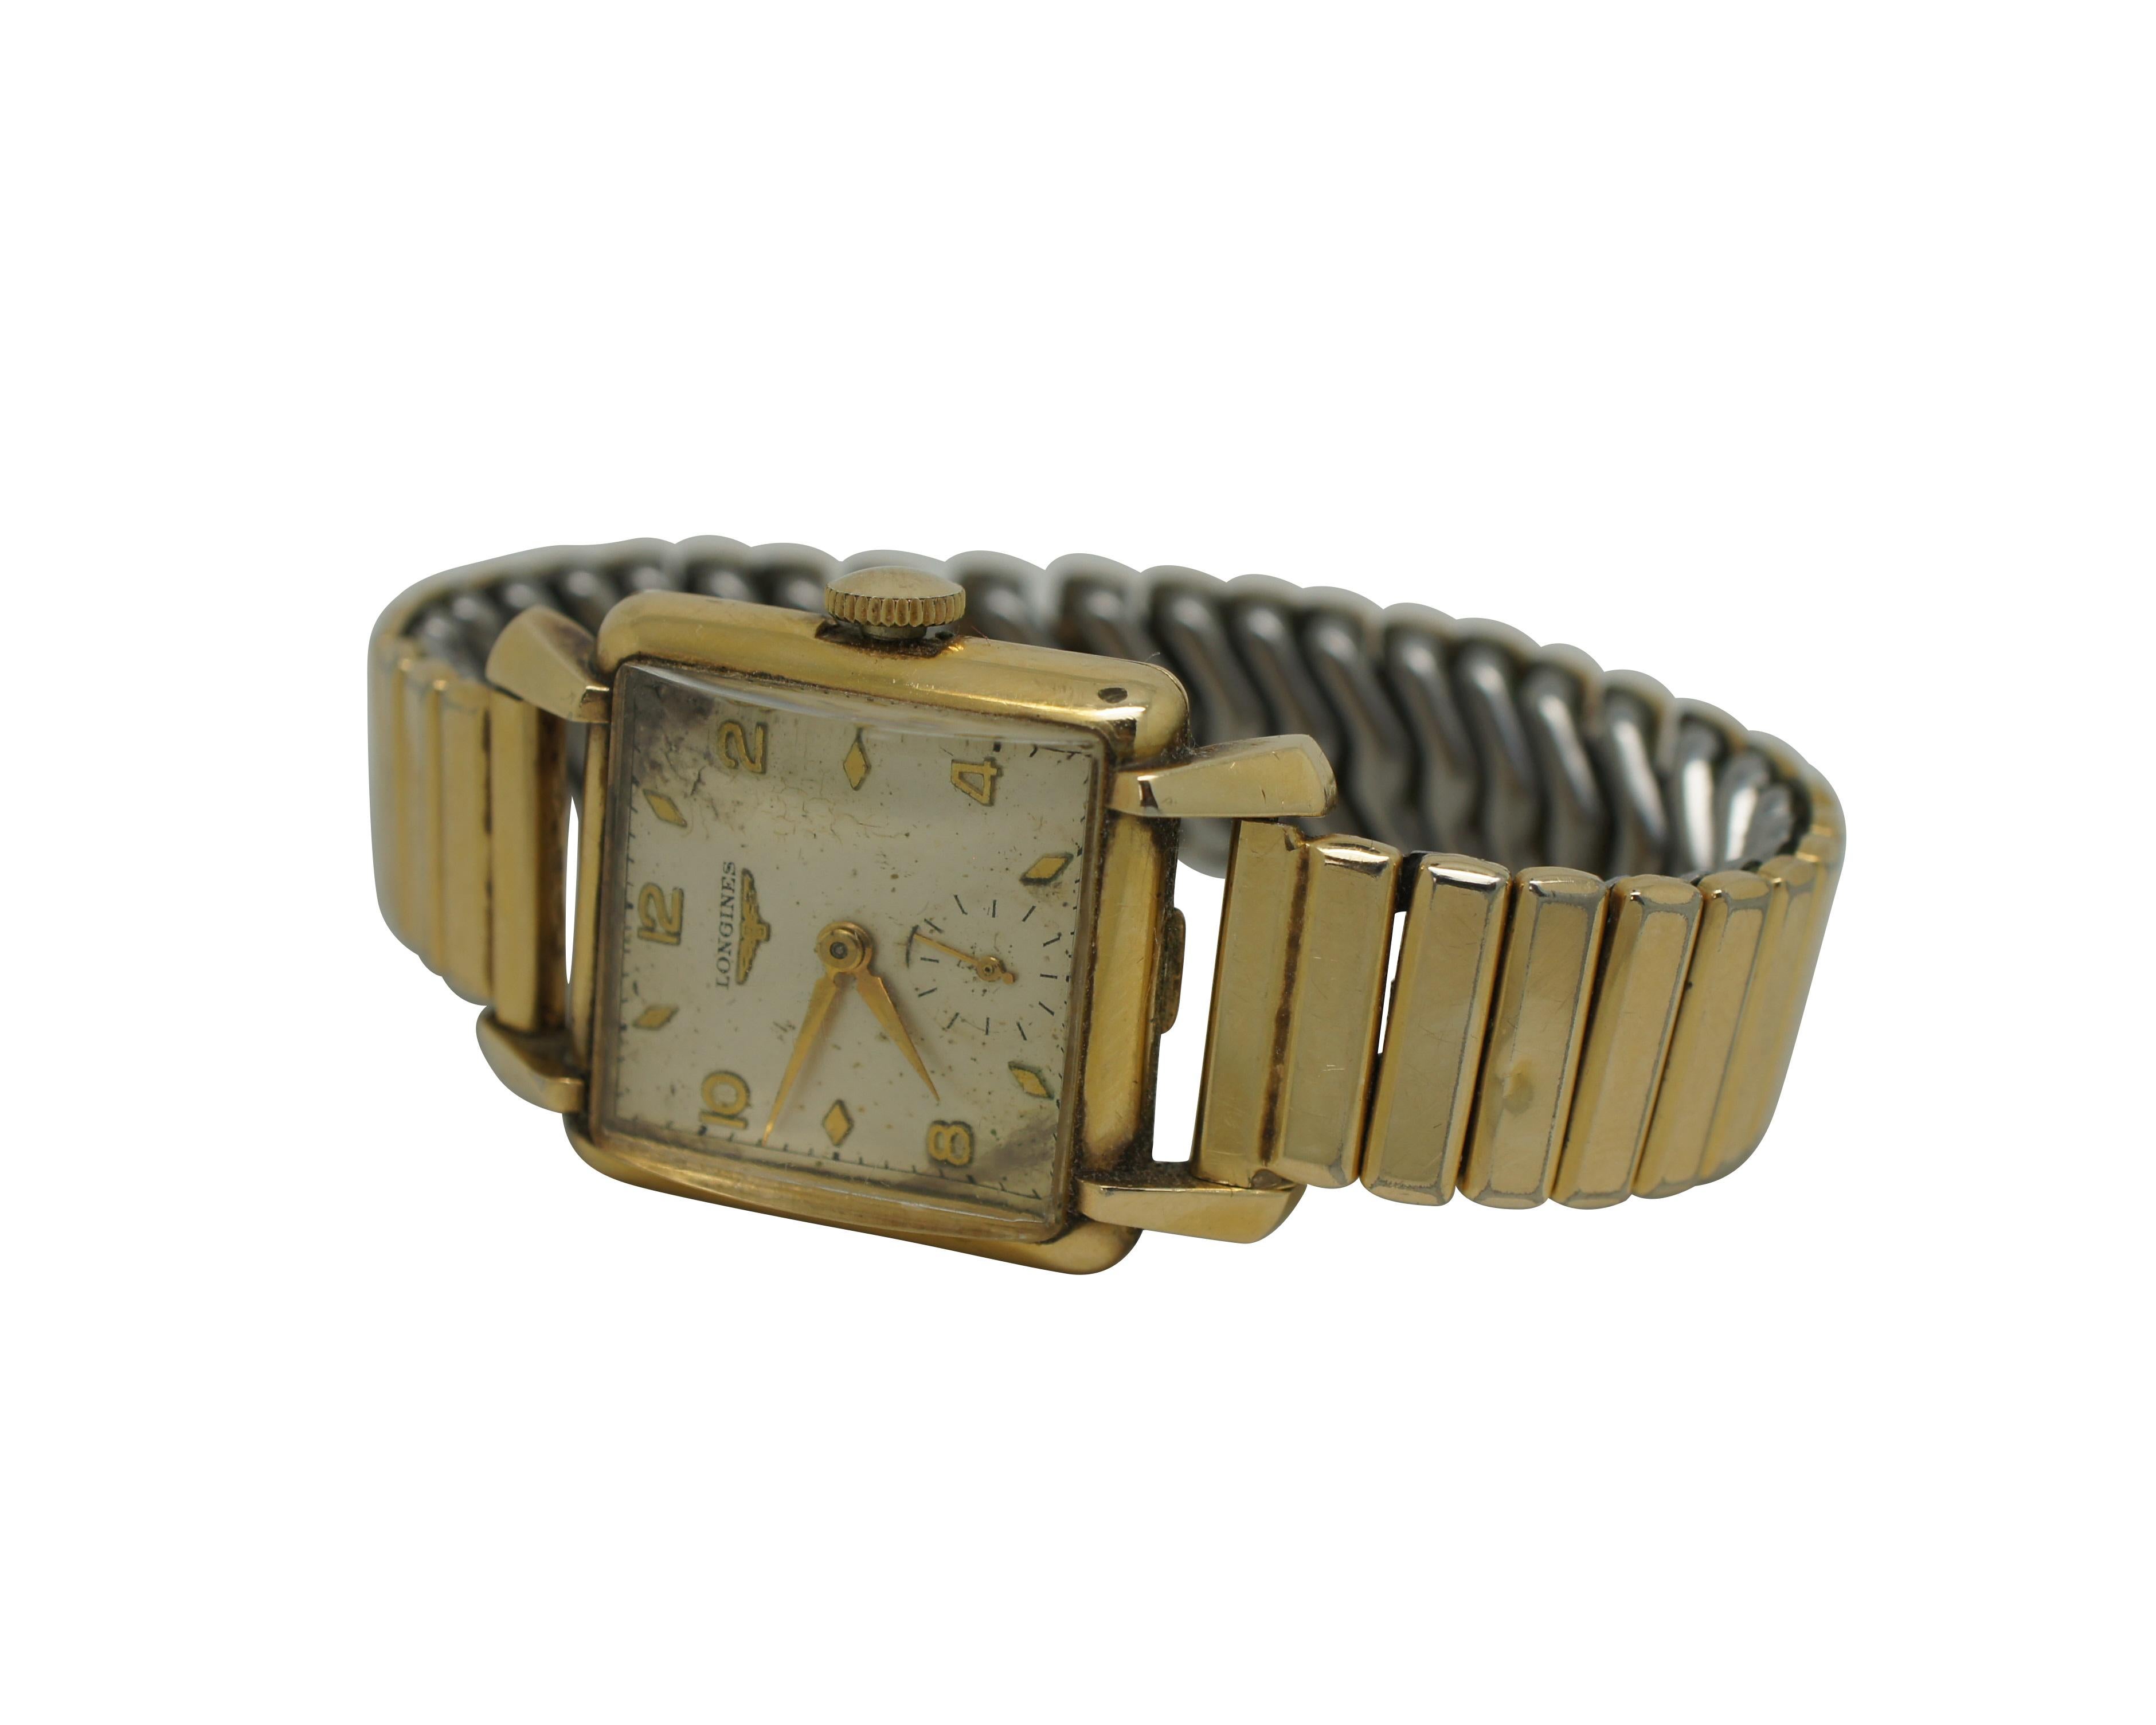 Vintage Longines 10k gold filled wrist watch featuring a Pontiac strech band.  Circa 1950s, Ser.# 7915121

The original serial number 7'915'121 identifies a wristwatch in yellow gold plated bearing the reference 6069. It is fitted with a Longines